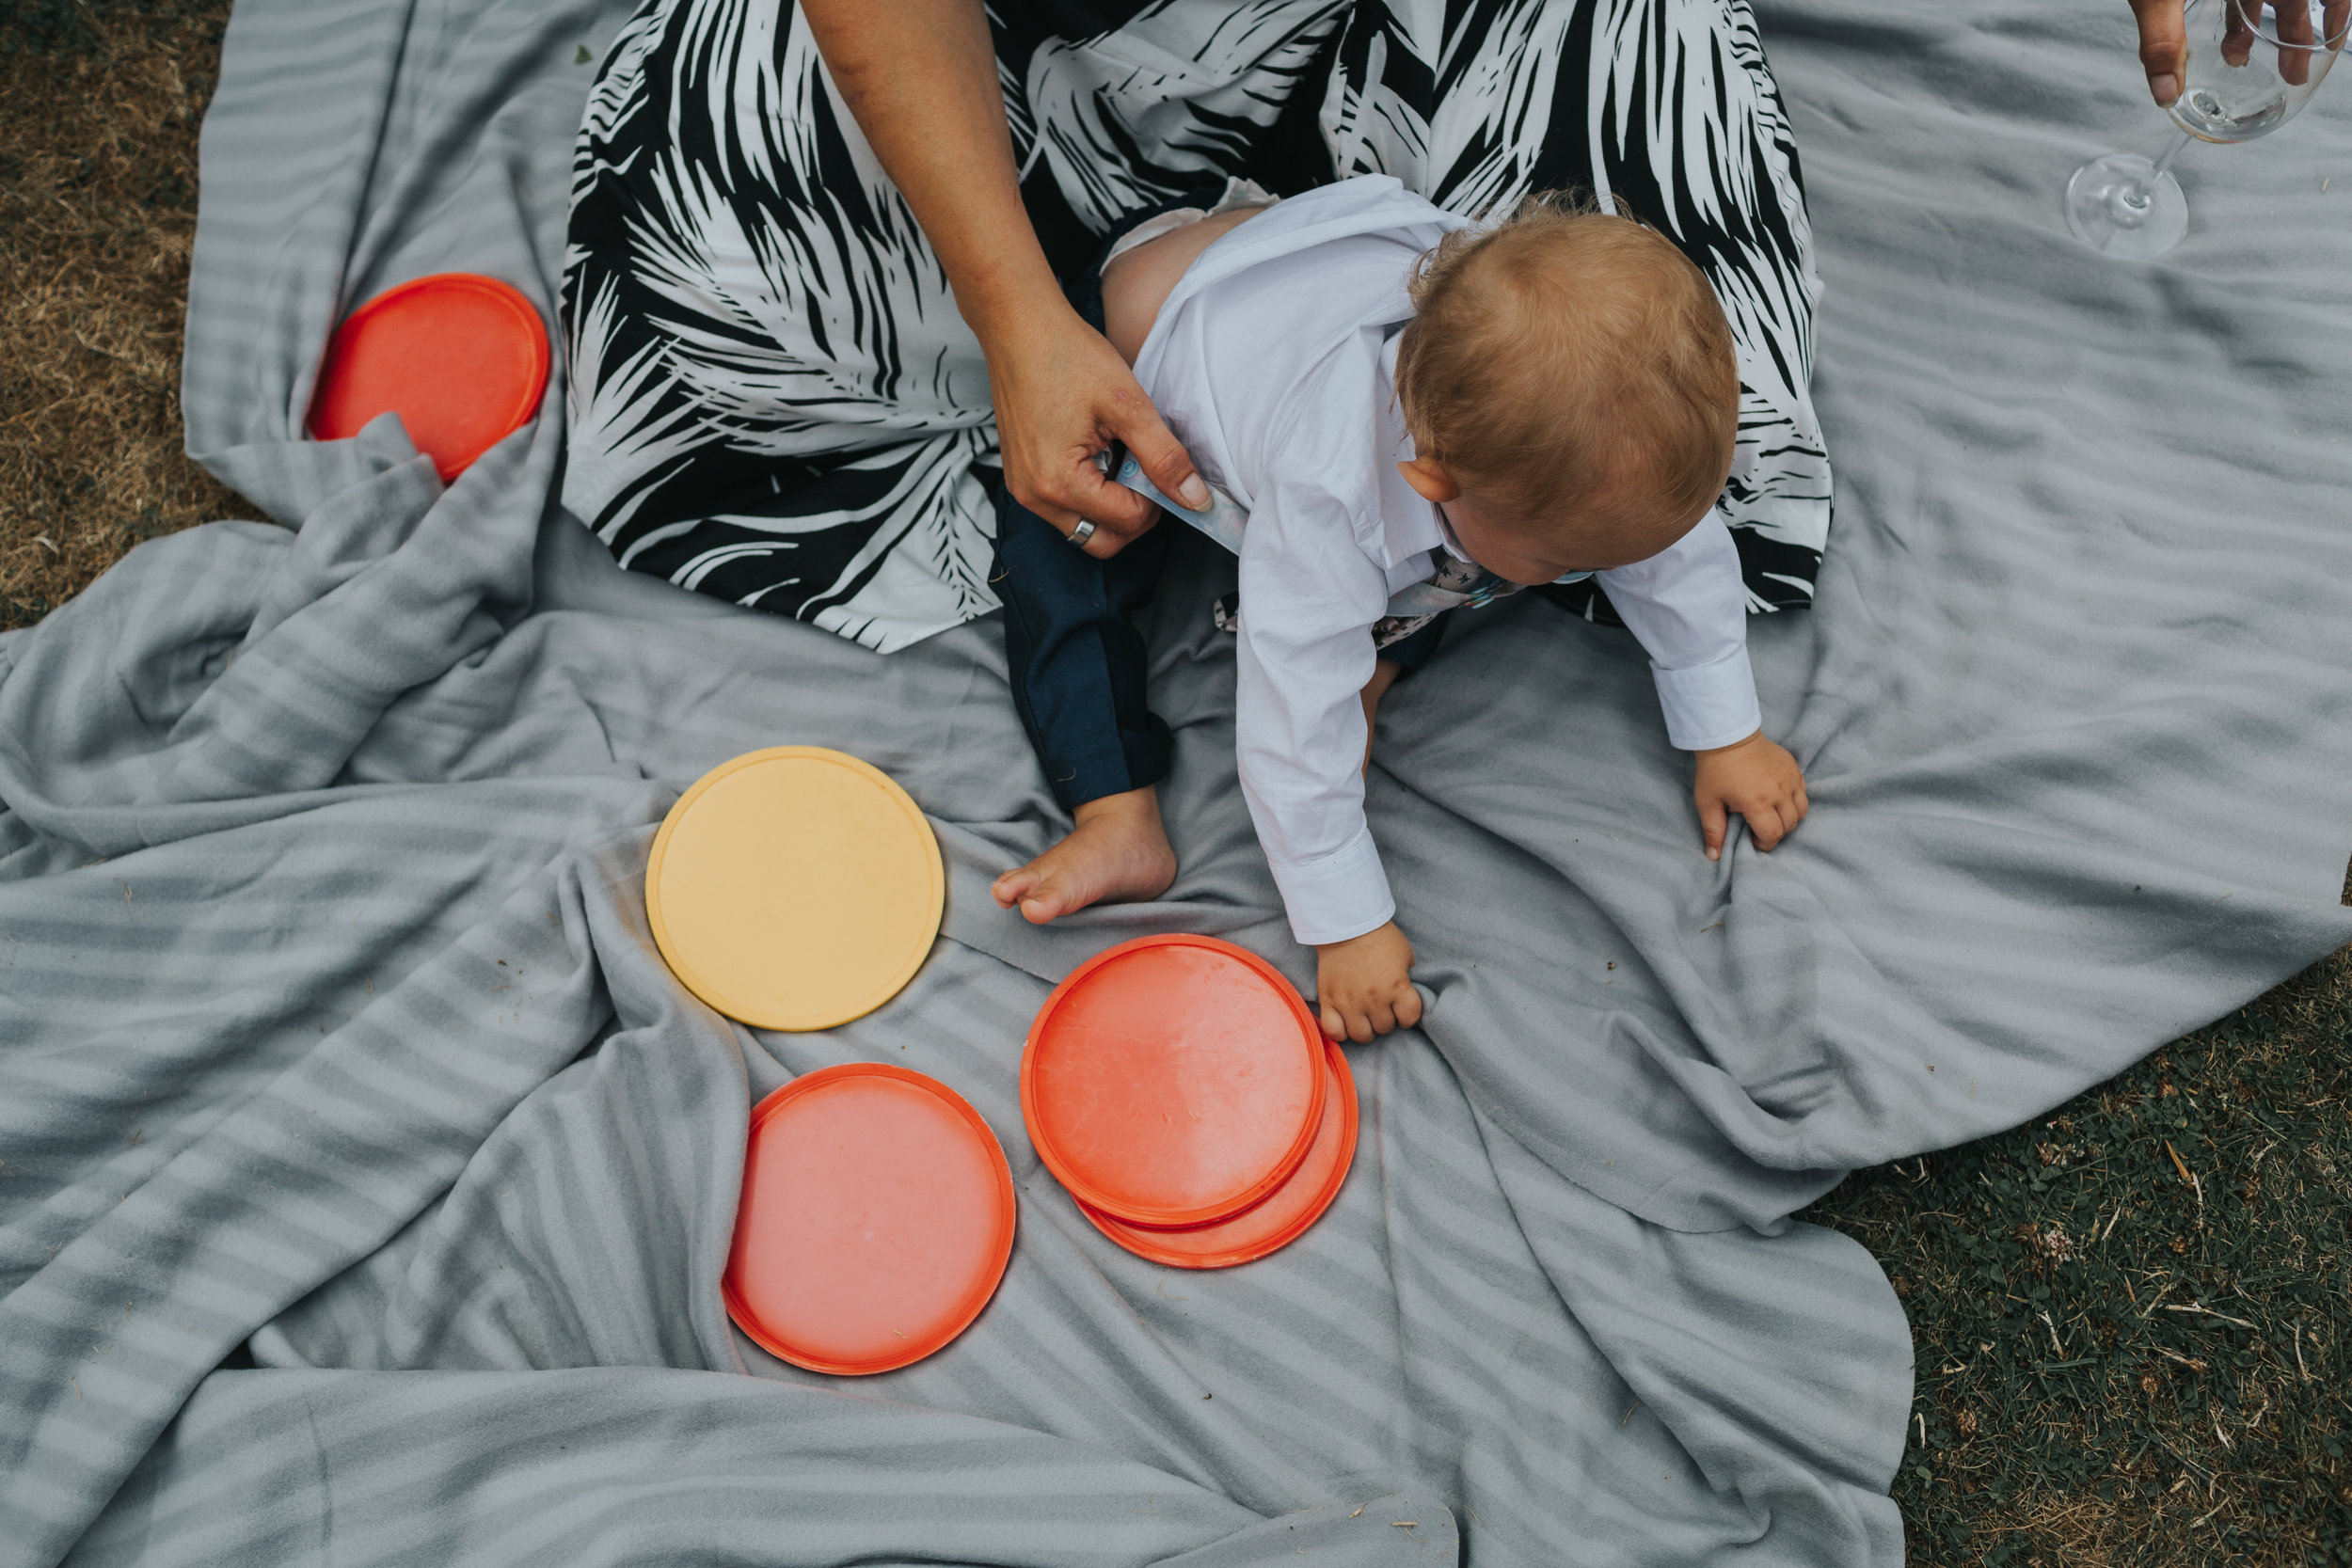 6 month old child photographed from above plays with connect 4 pieces on a grey blanket at an outdoor wedding in Manchester, UK. 